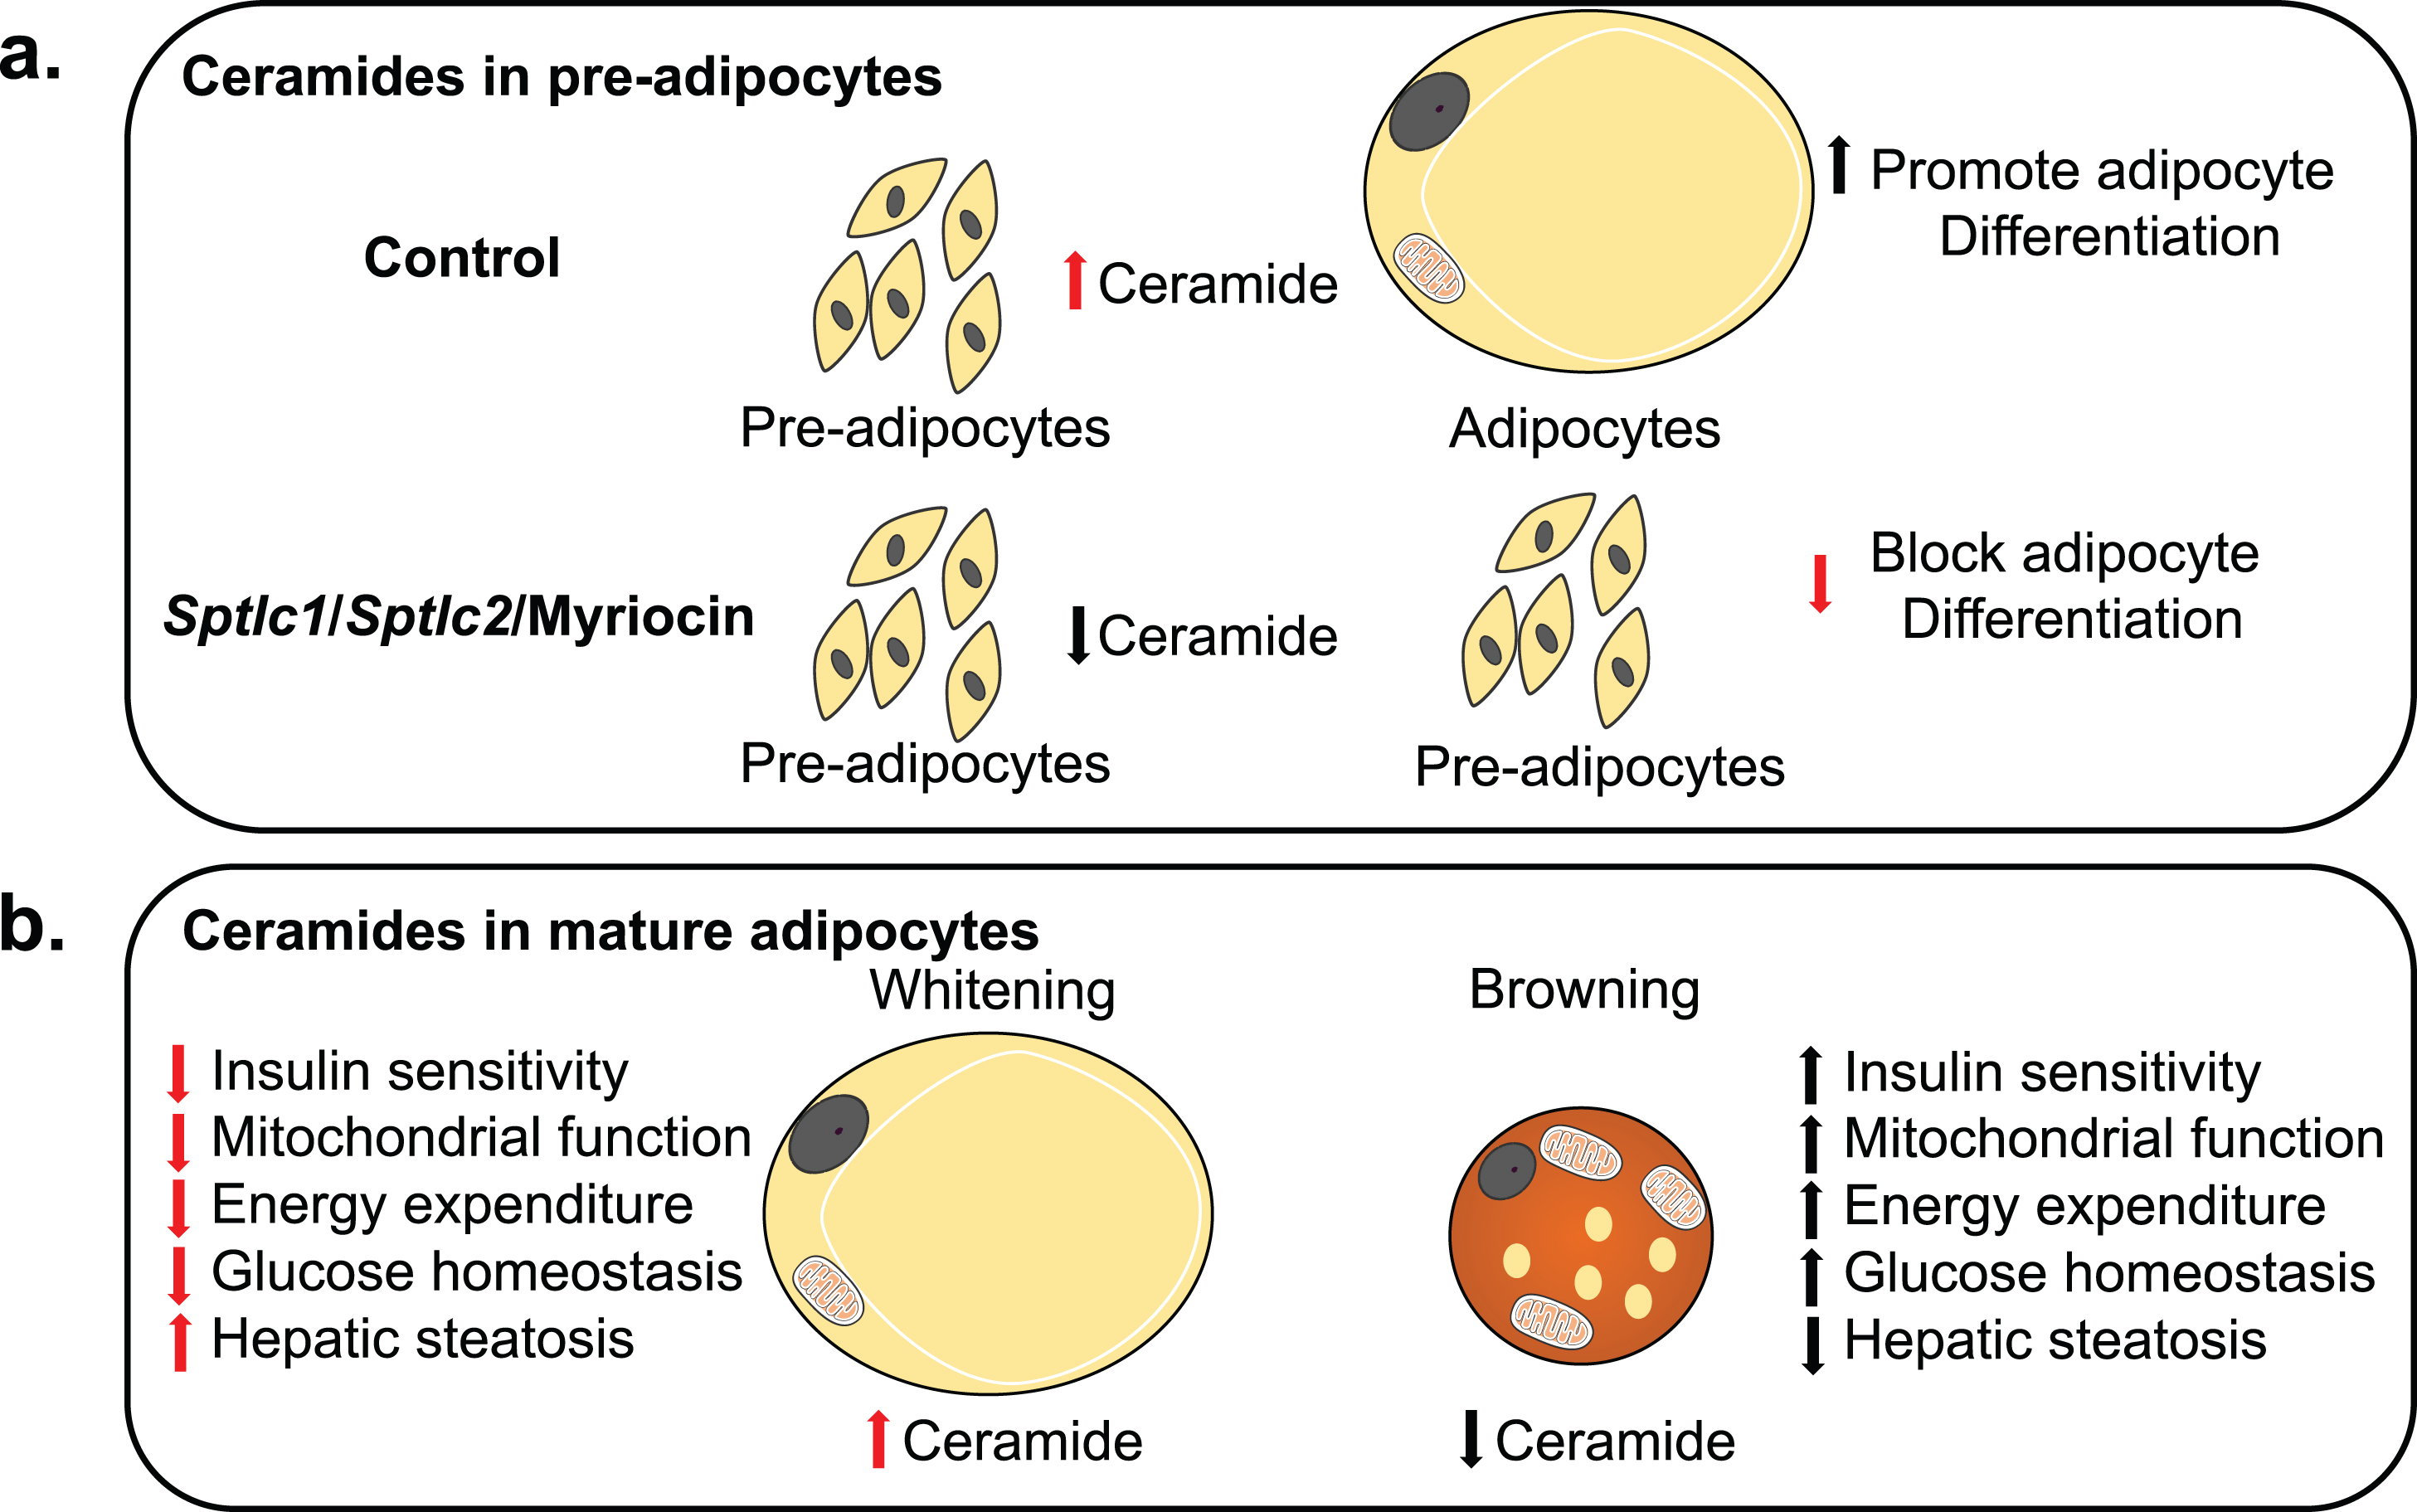 Model for Ceramide sensing in adipocytes and its systemic effects. (a) Ceramides are essential for the differentiation of pre-adipocytes into adipocytes. Ablation of Sptlc1/2 and pharmacological inhibition of ceramides biosynthesis in pre-adipocytes blocks differentiation. (b) Adipocyte ceramides serve as nutritional determinants to promote lipid storage and inhibit thermogenic capacity hence promoting “whitening” rather than “beigeing/britening” of adipocytes. Ablation of ceramide synthesis in mature adipocytes of obese mice promotes beigeing/britening of adipocytes which improves insulin sensitivity and mitochondrial function in adipocytes and has systemic effects on improving mitochondrial function, energy expenditure, glucose homeostasis and resolving hepatic steatosis.